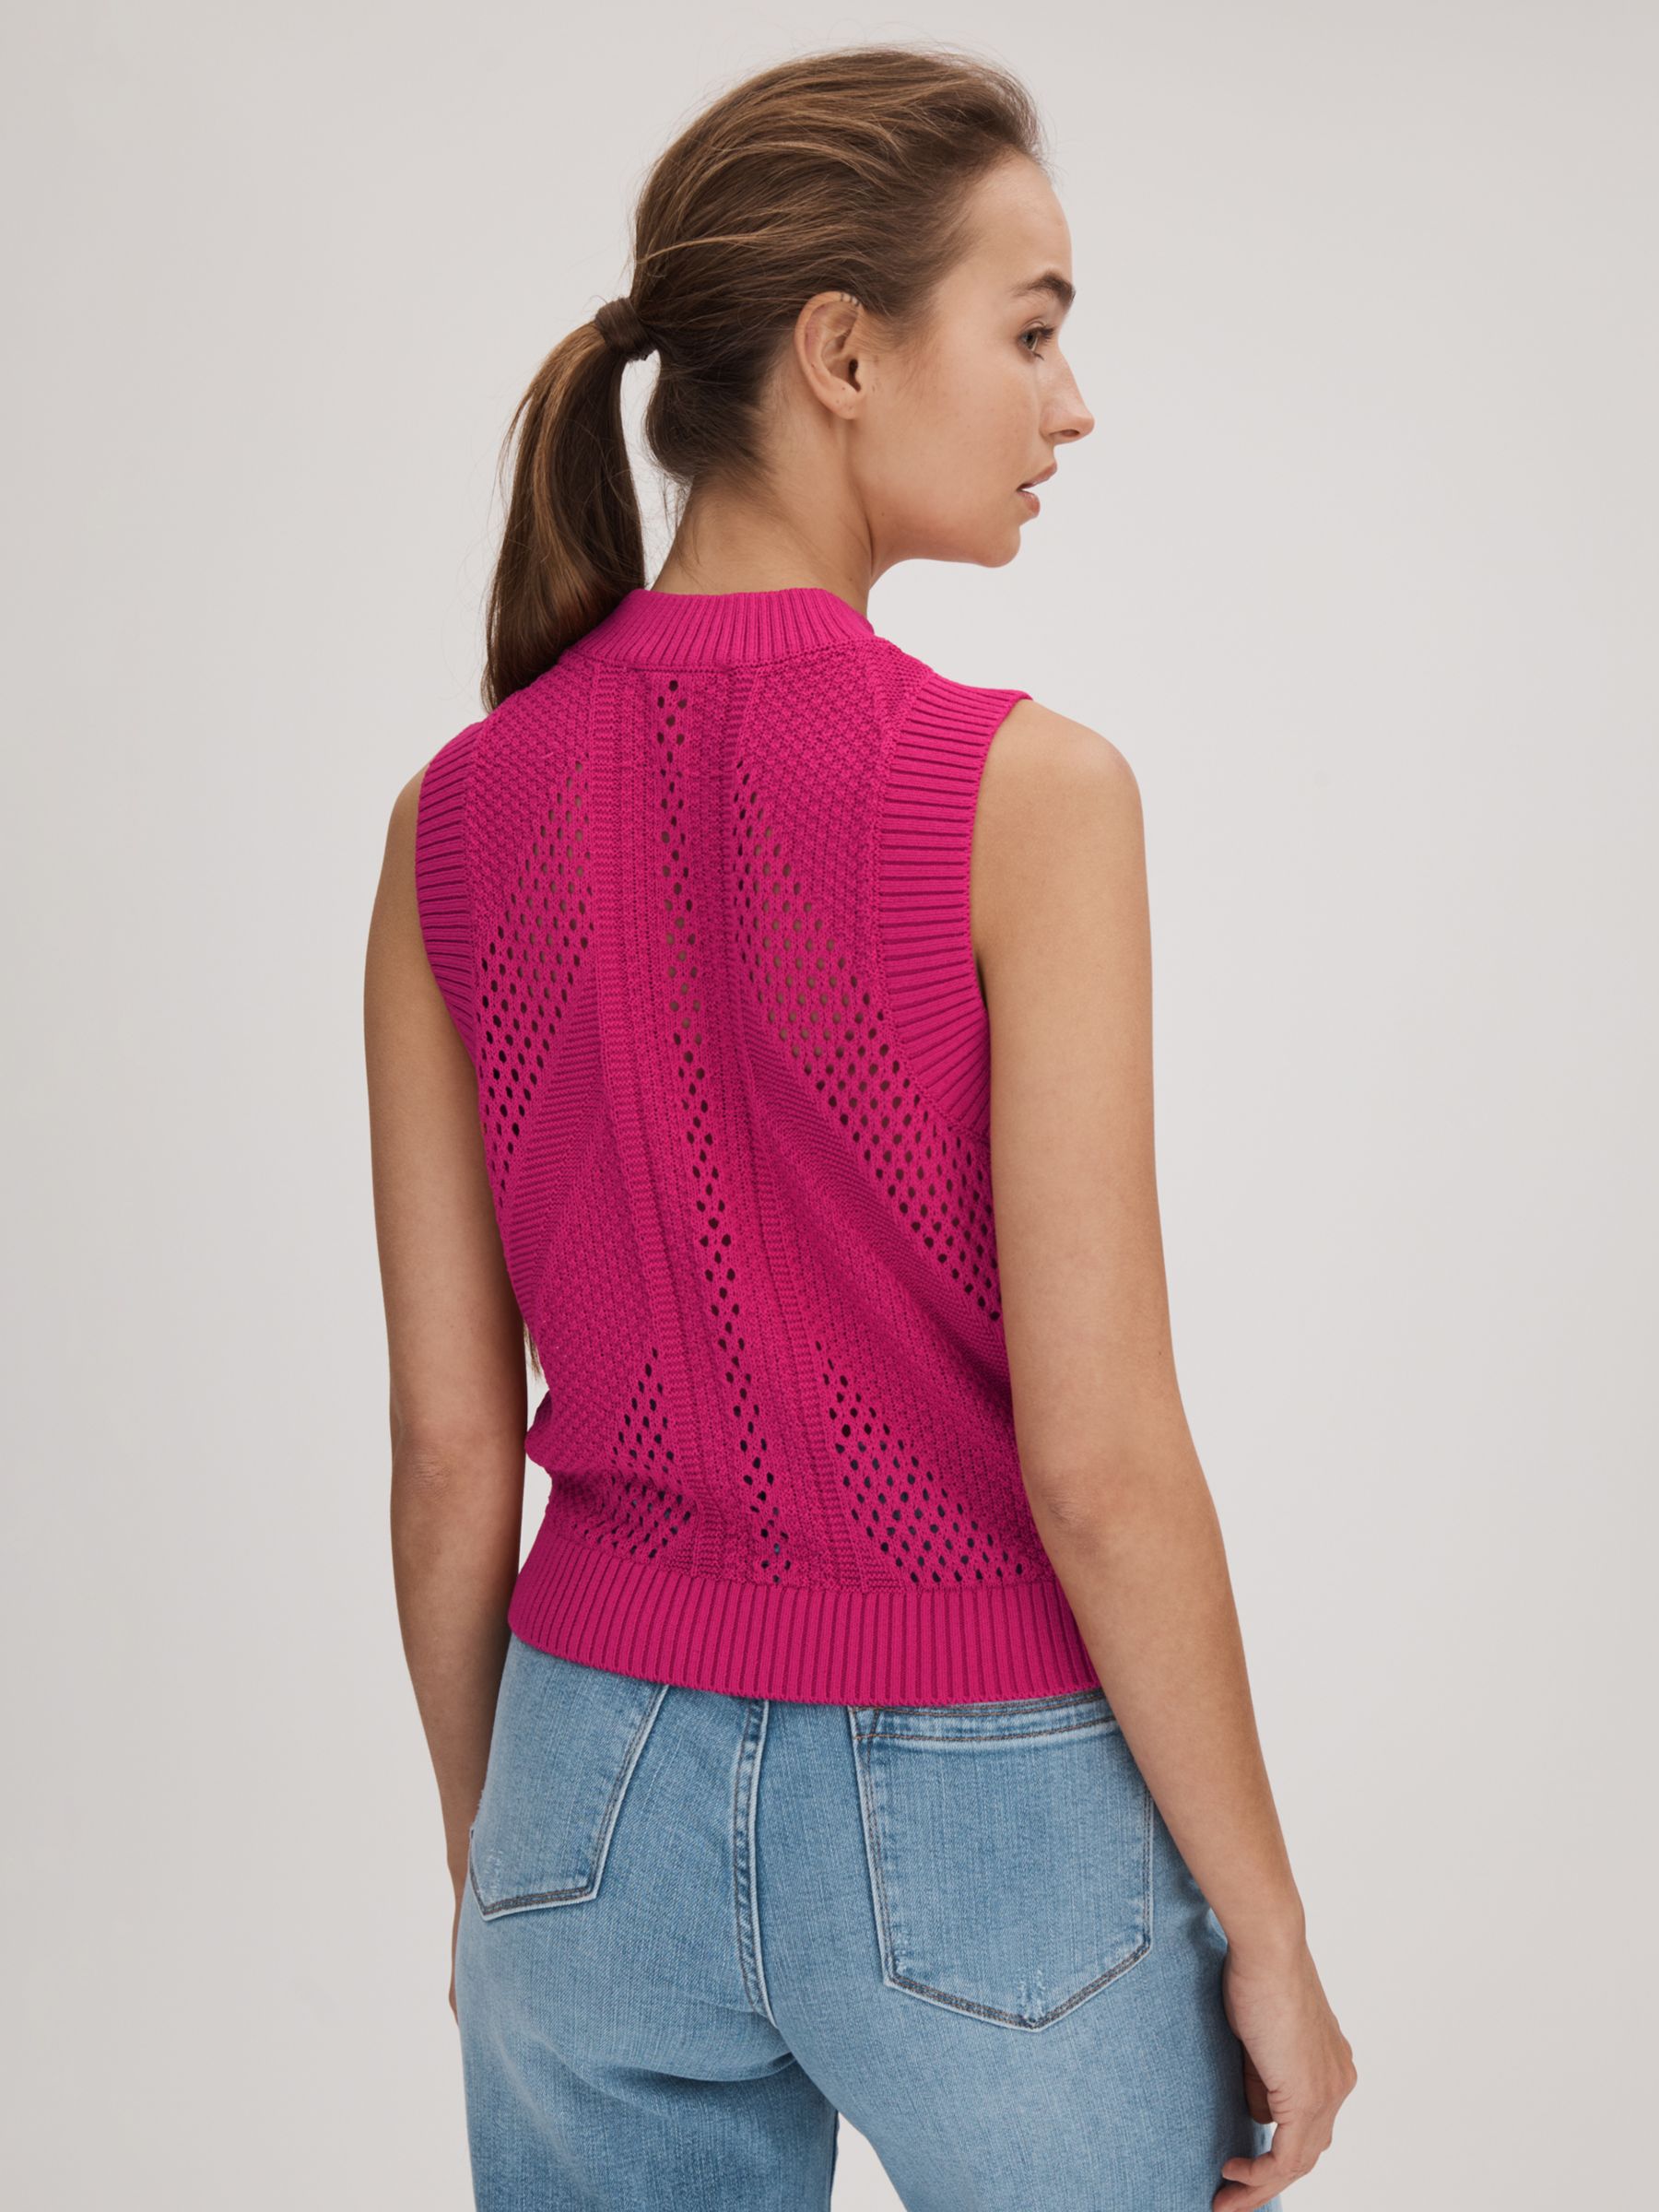 FLORERE Crochet Trim Knitted Tank Top, Bright Pink, 8